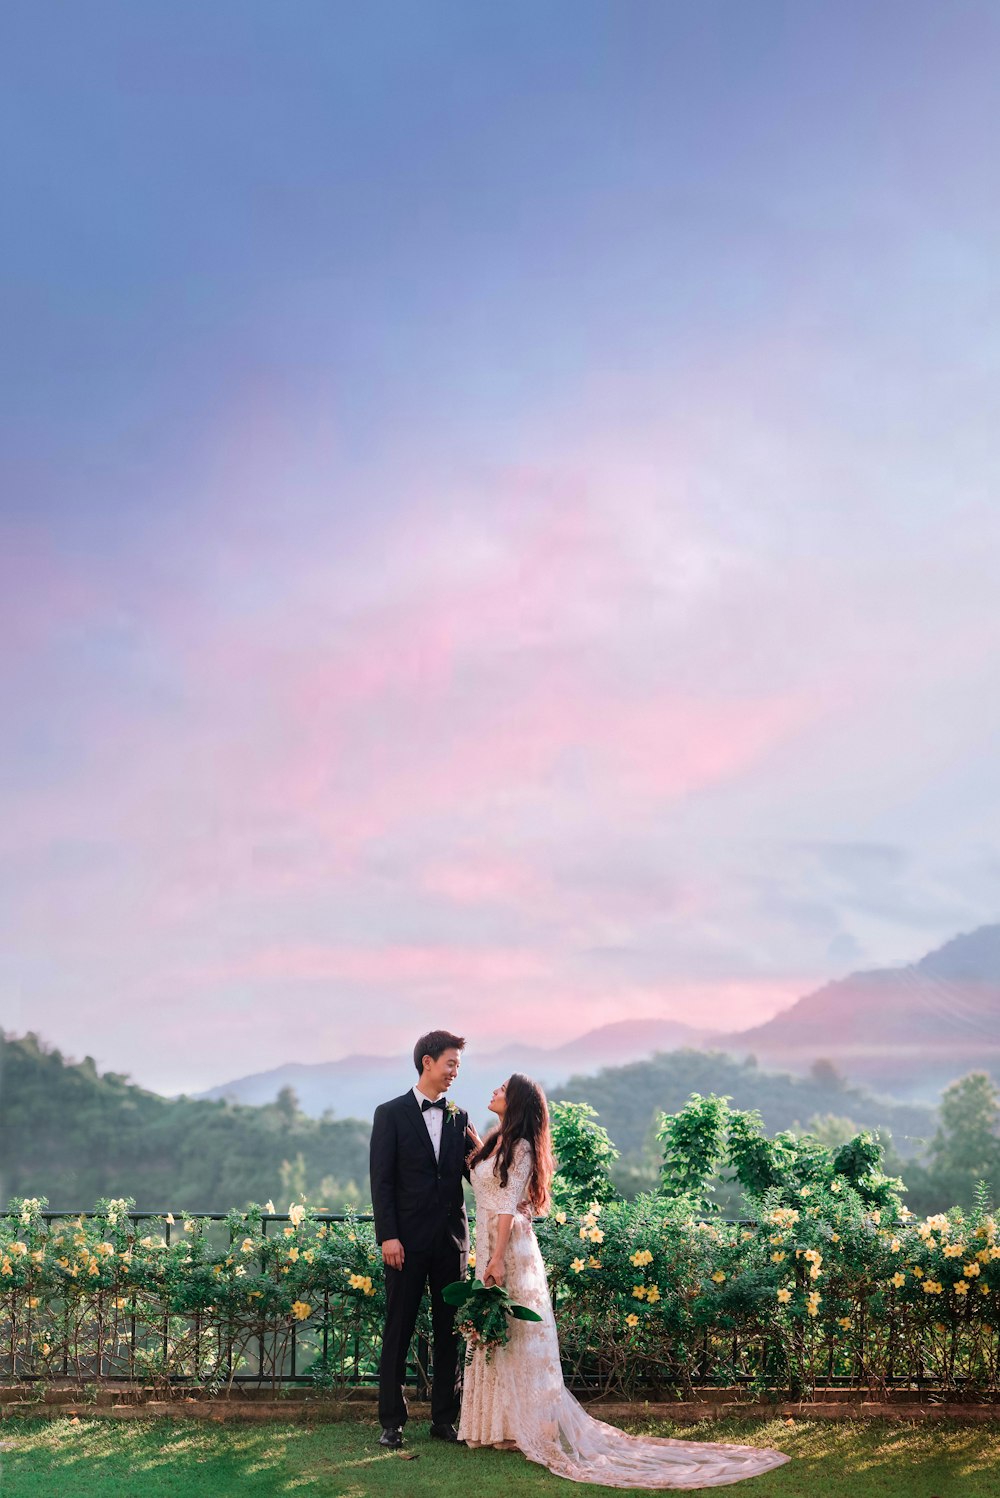 a man and woman in wedding attire standing in front of a vineyard